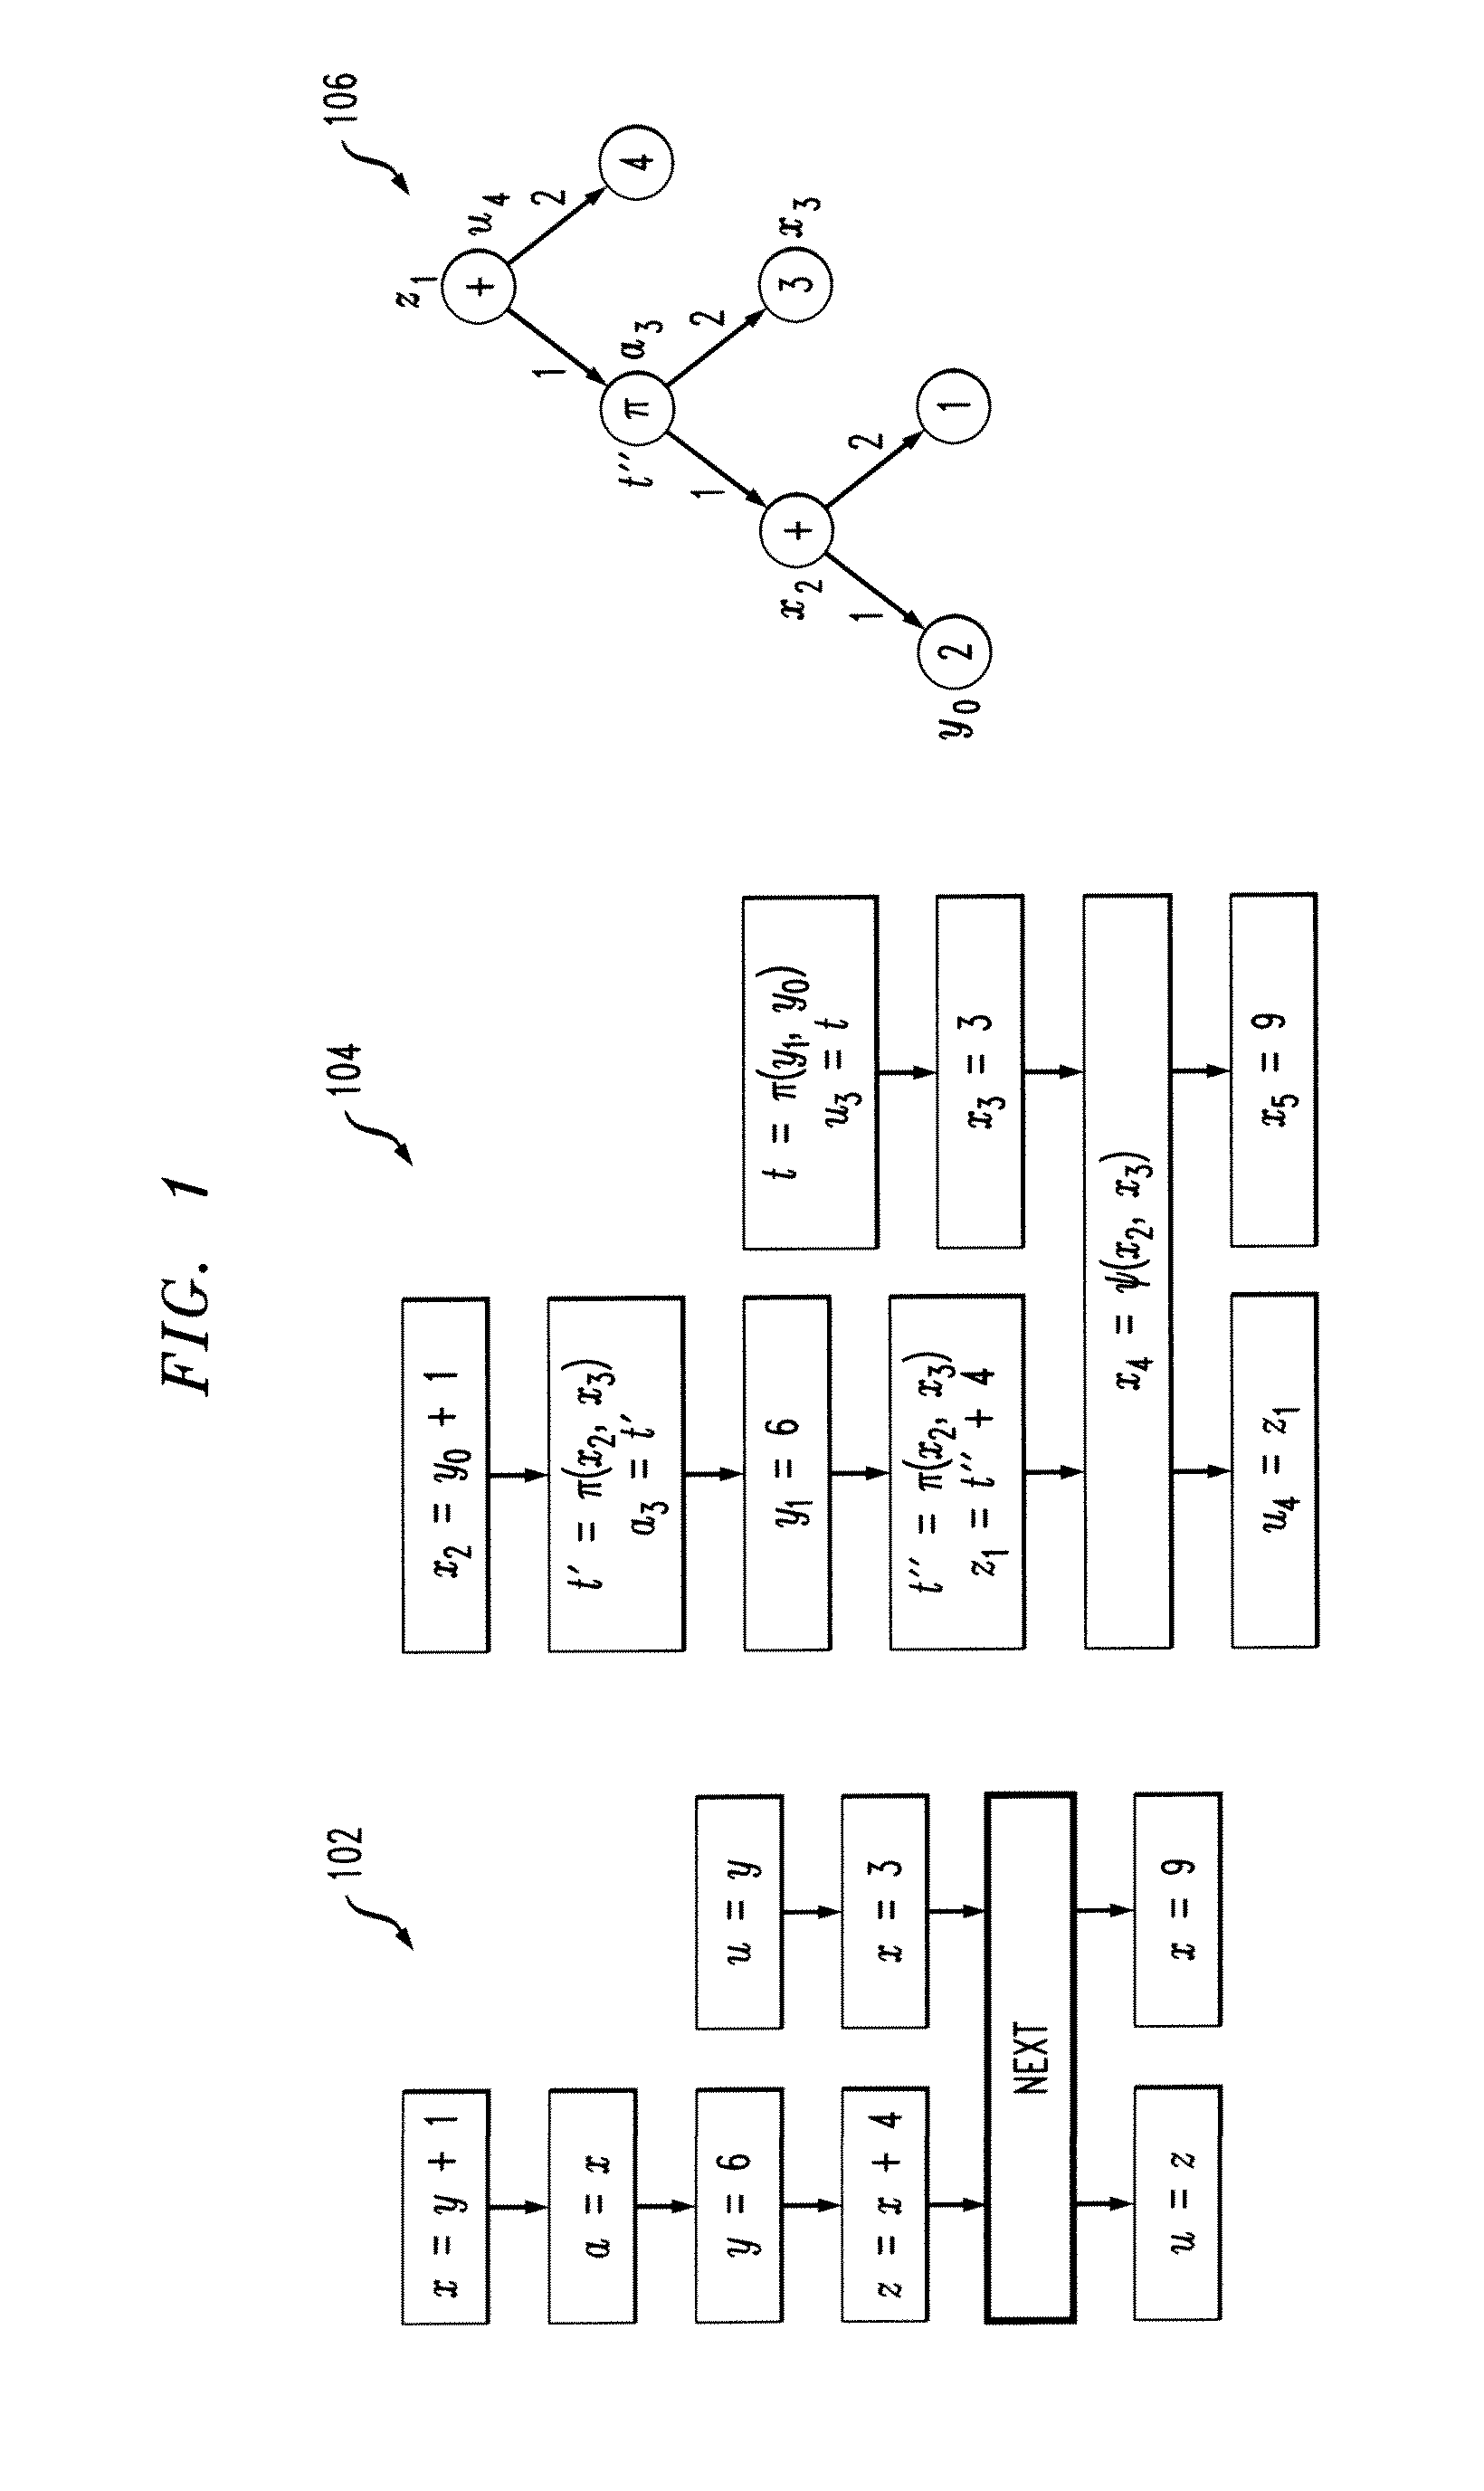 Concurrent Static Single Assignment for General Barrier Synchronized Parallel Programs